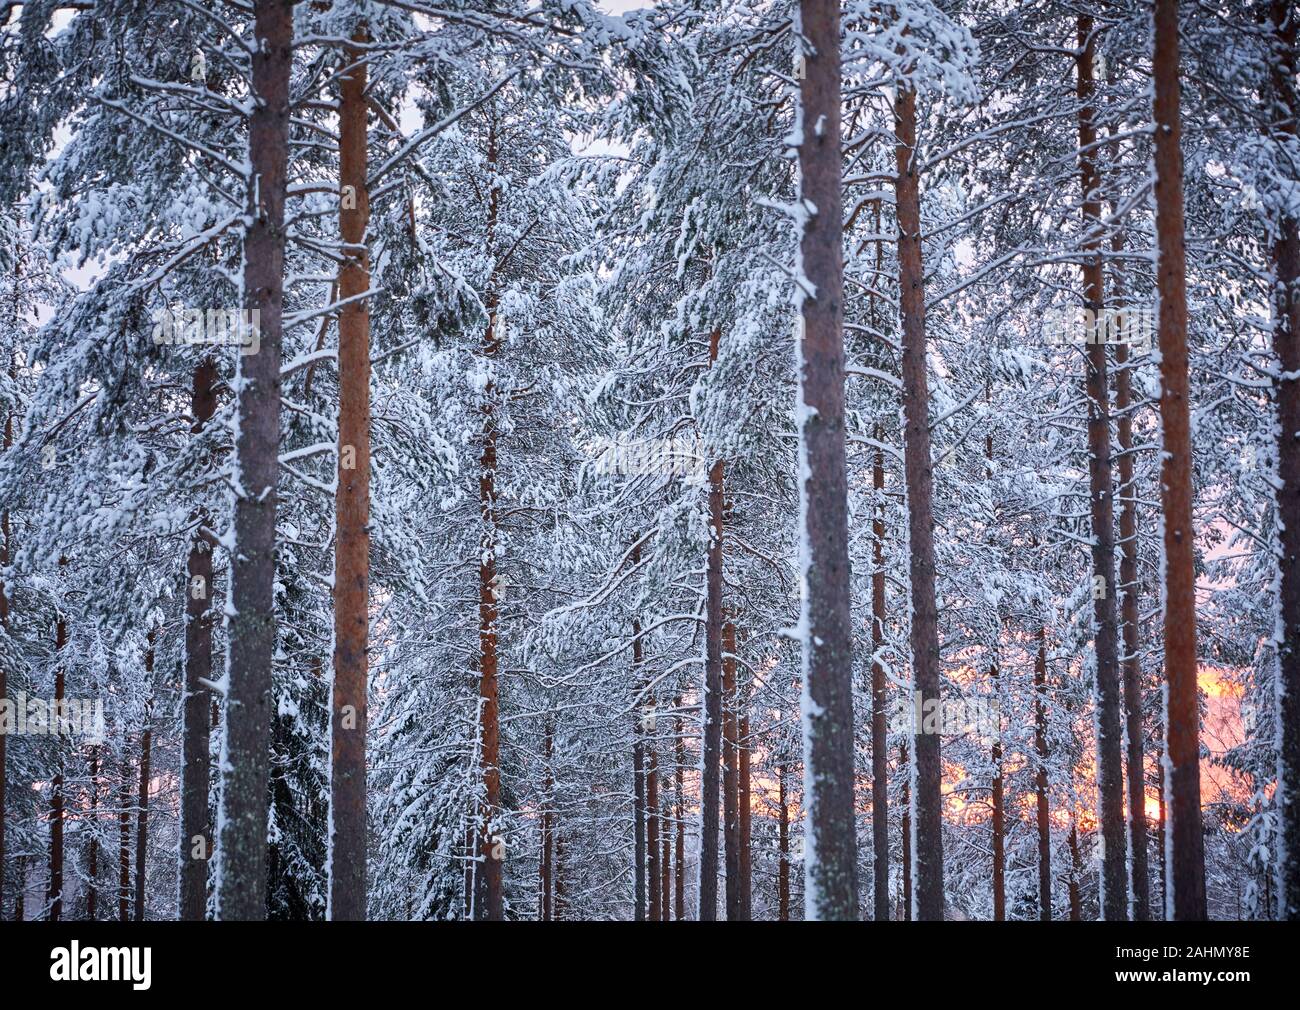 Finnish Rovaniemi a city in Finland and the region of Lapland Santa Park forest Stock Photo